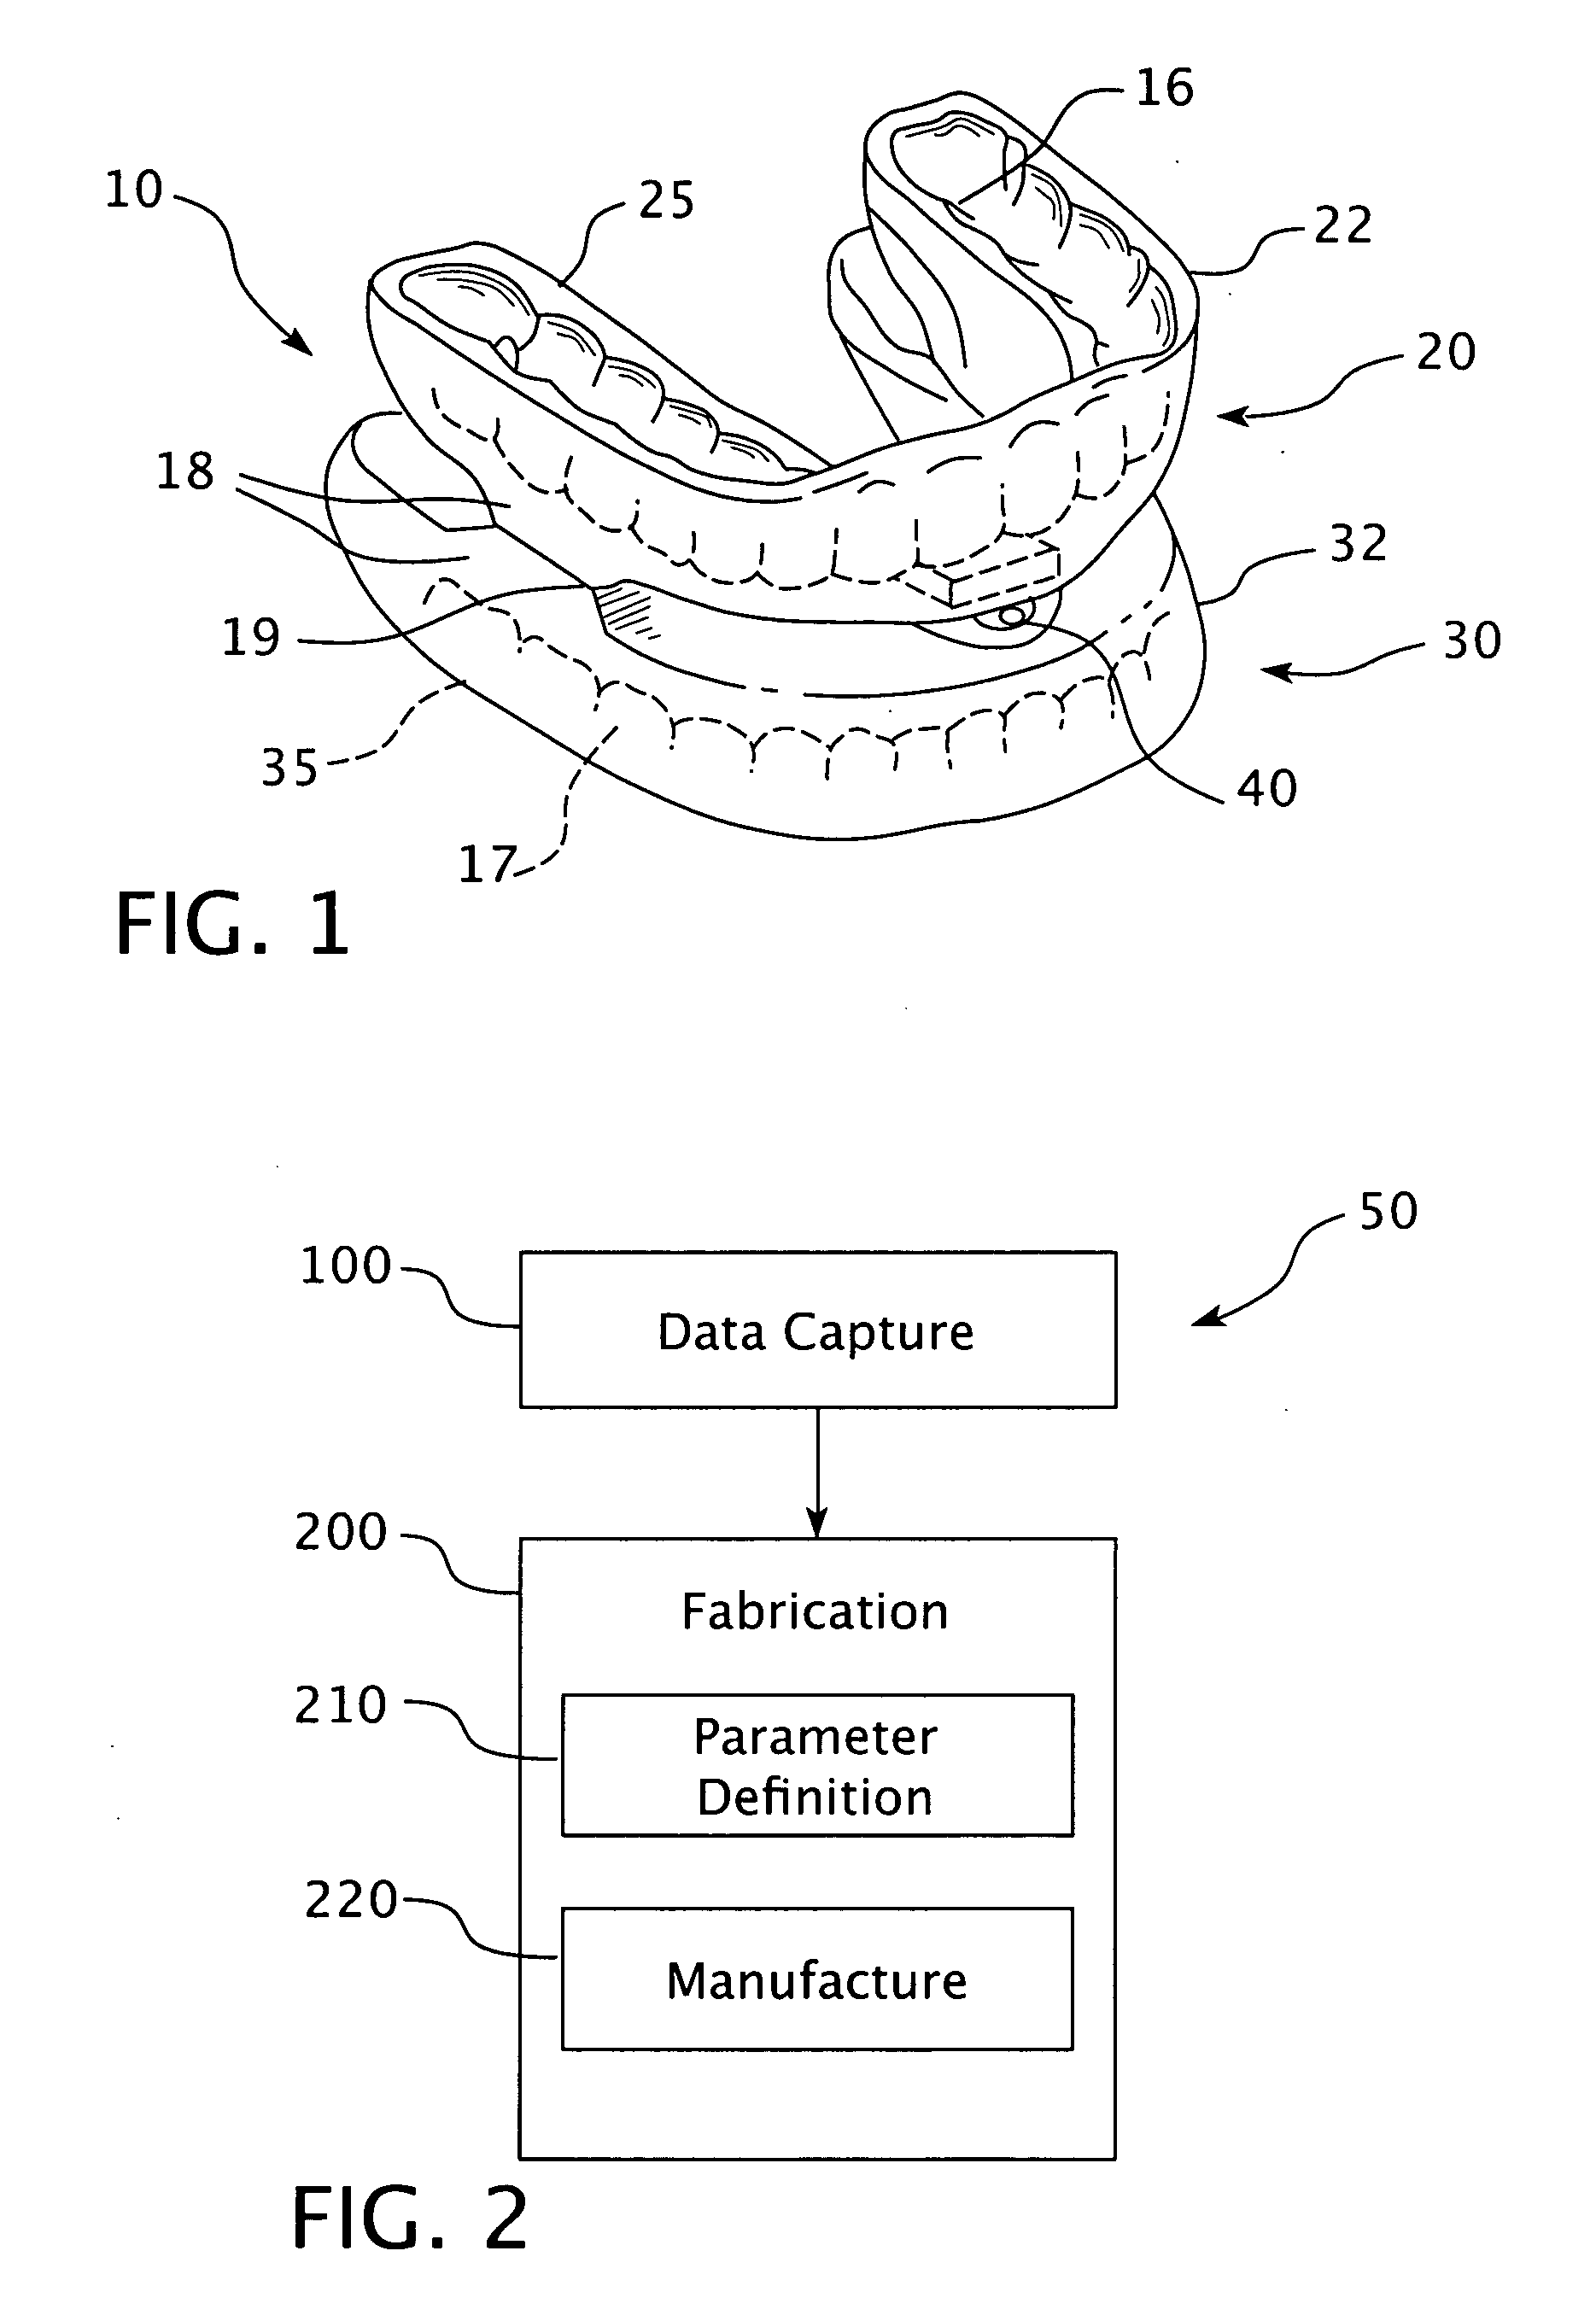 Apparatus and method for manufacturing a mandibular advancement device